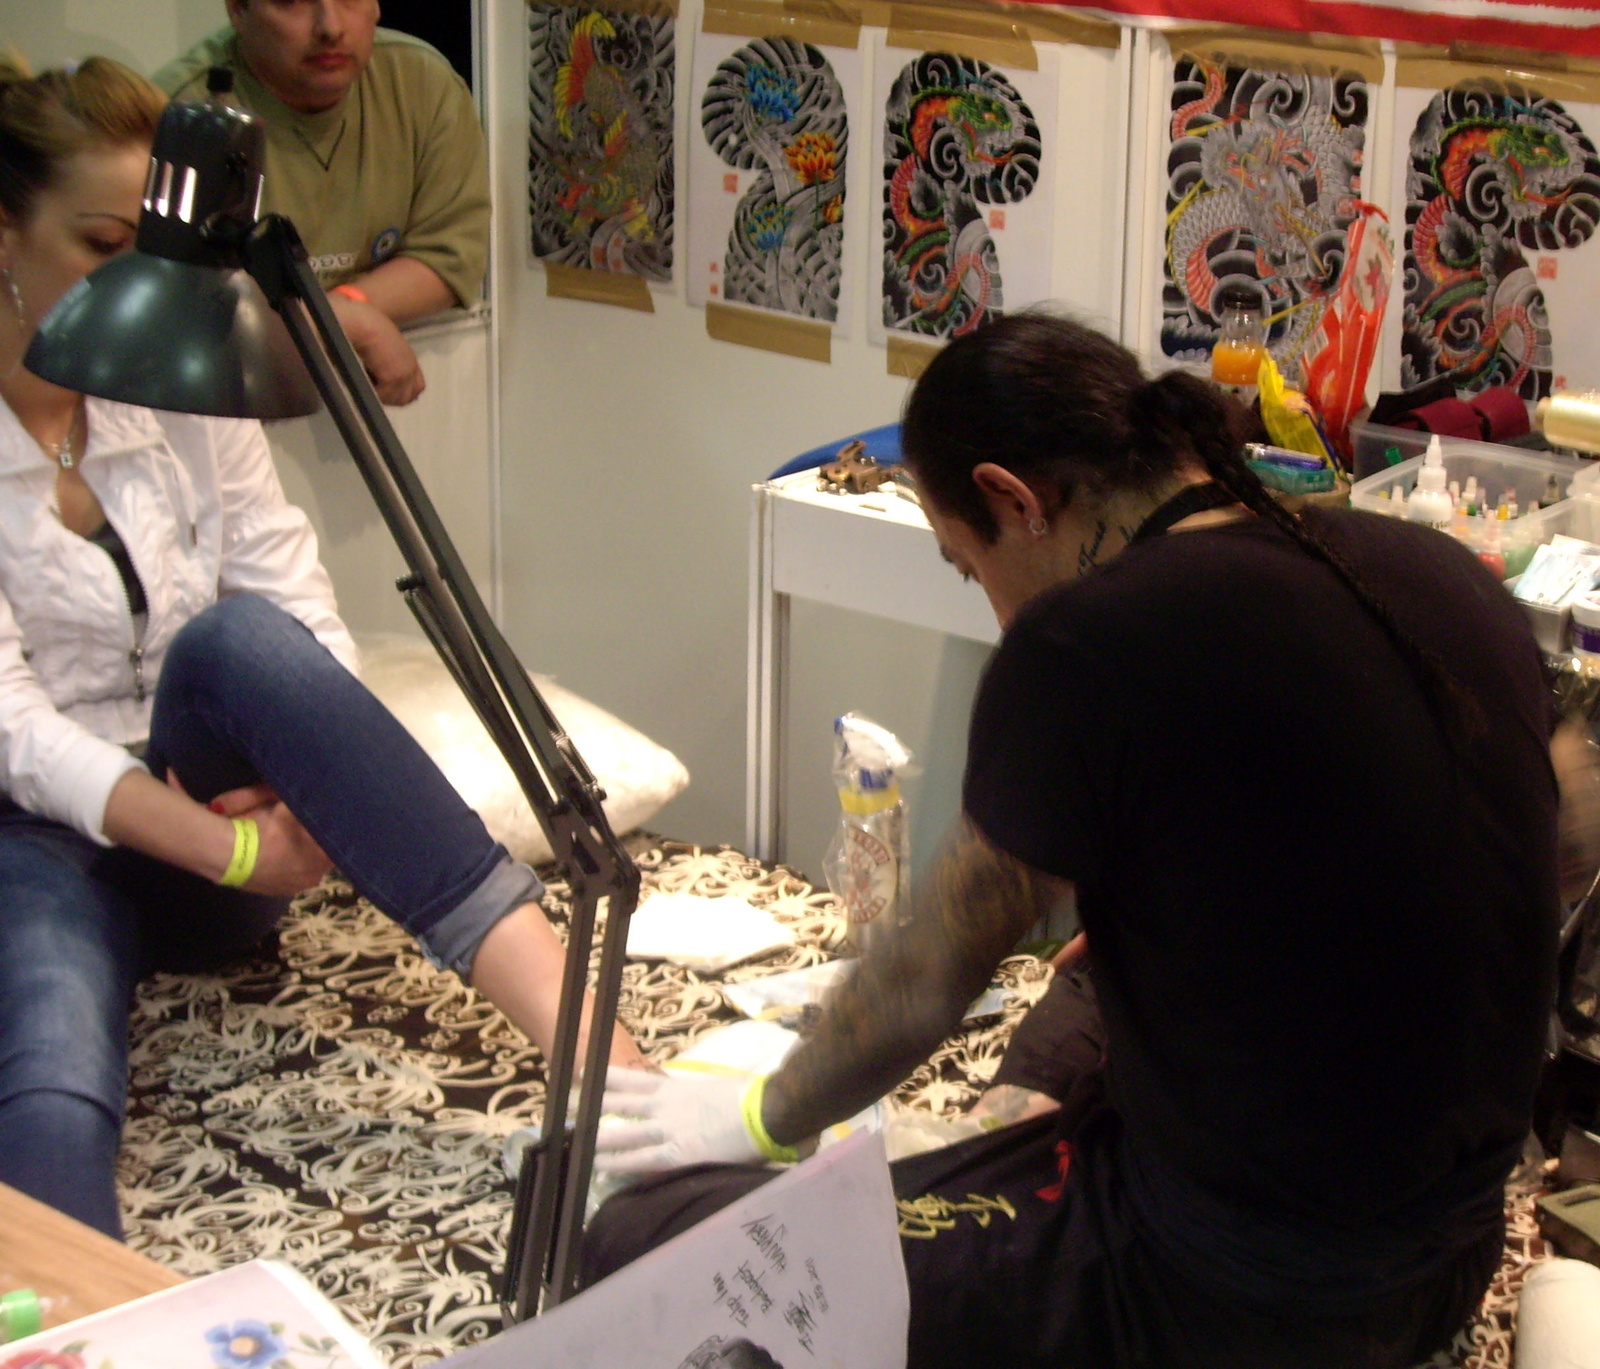 Traditional Japanese Tattooing